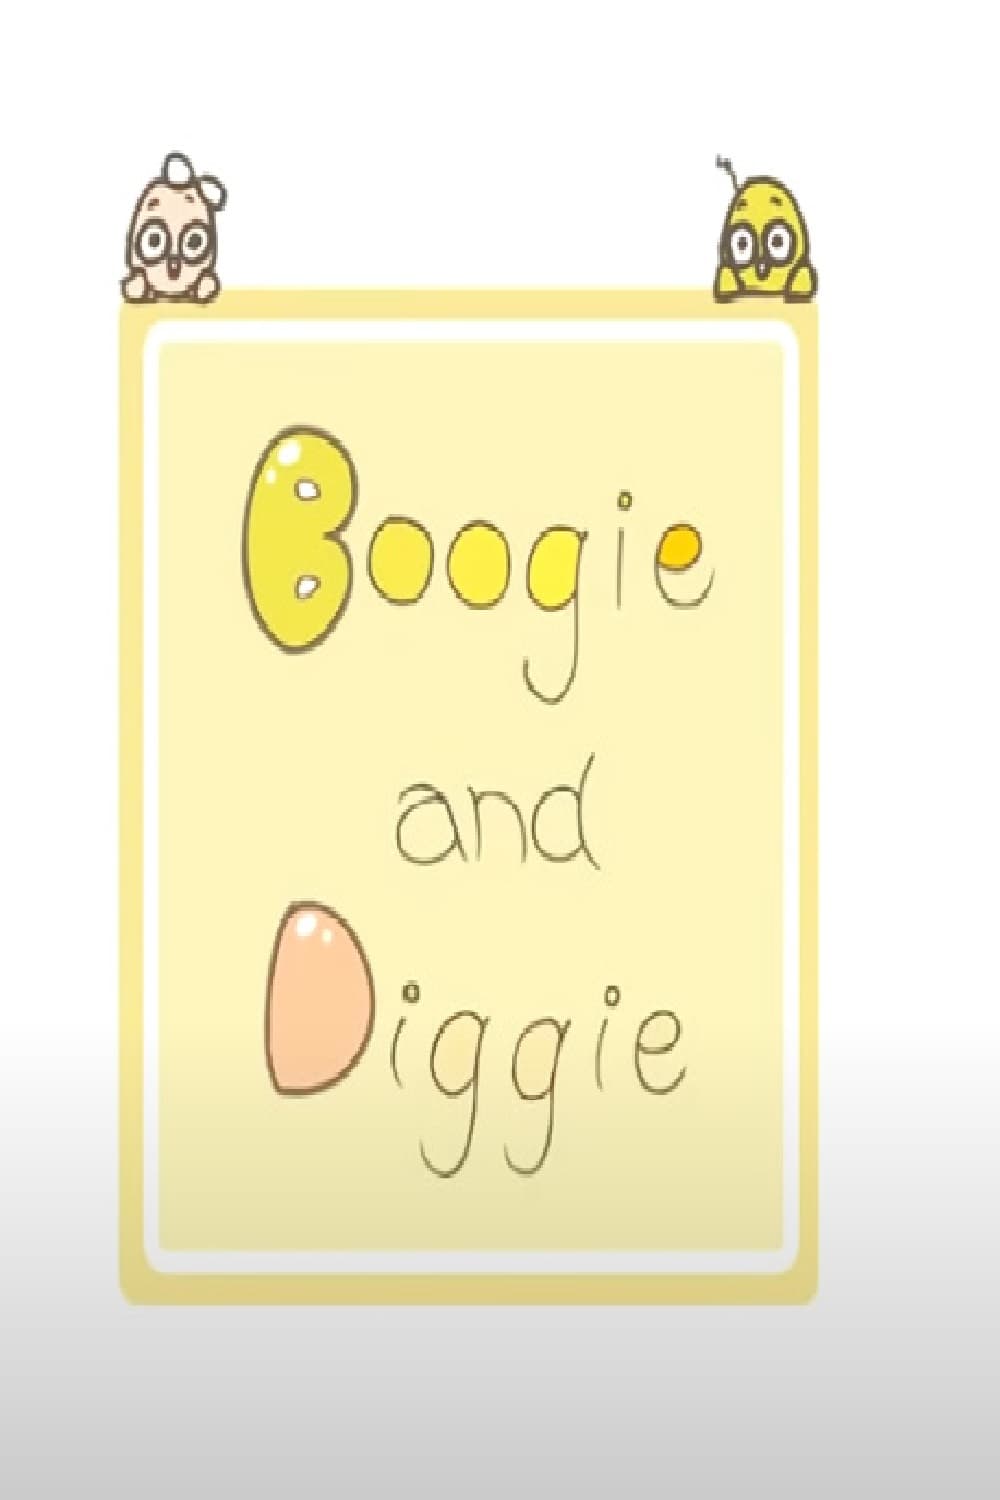 Boogie and Diggie